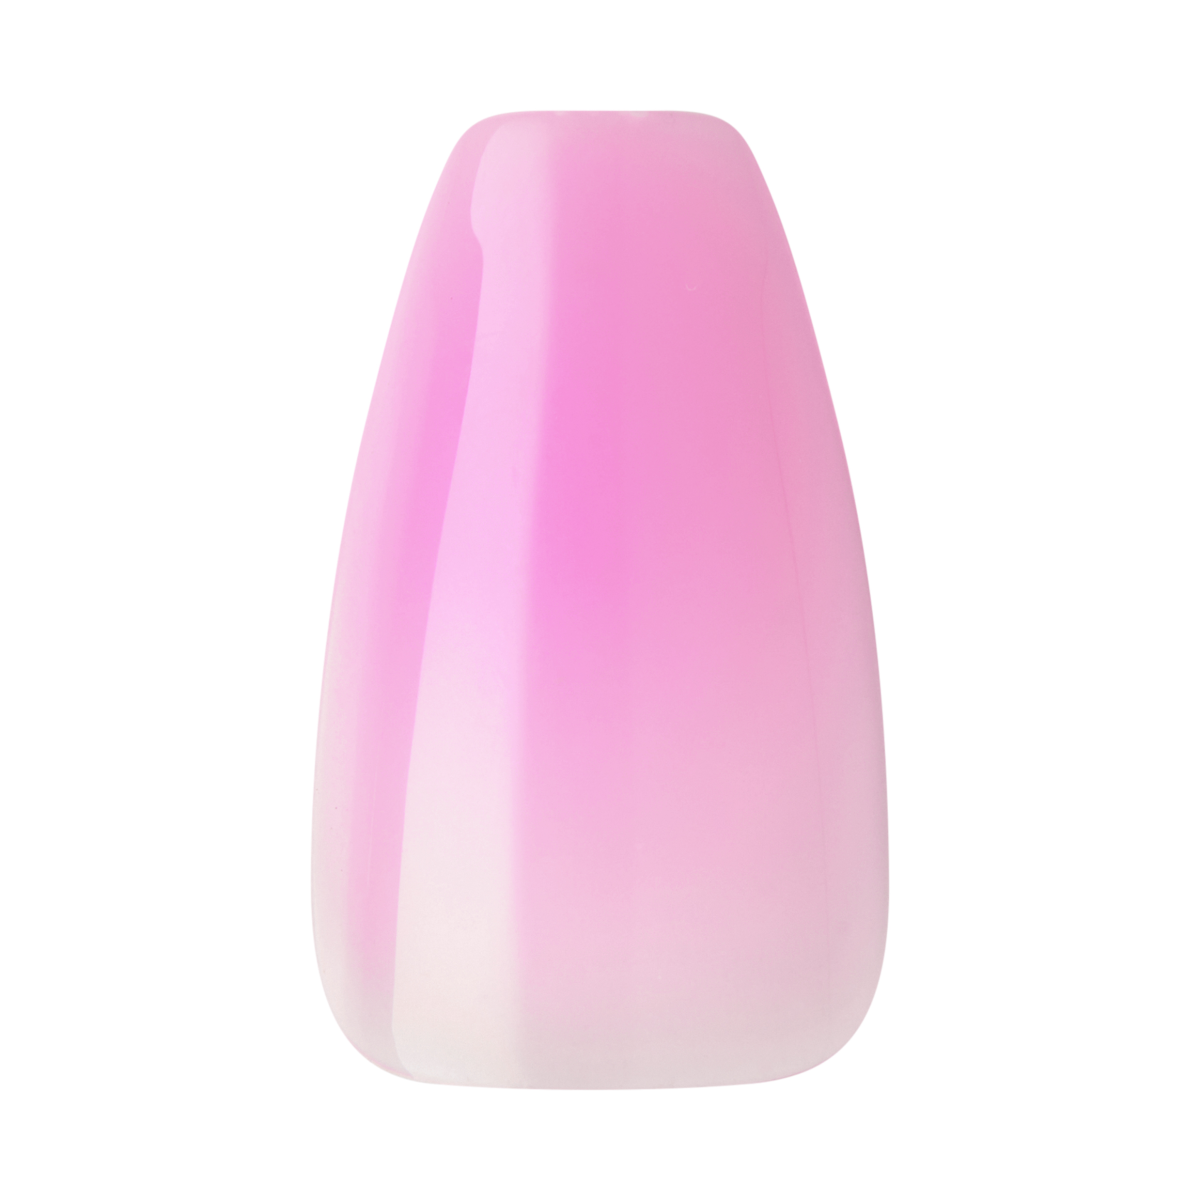 KISS Gel Fantasy Jelly Color Nails - Jelly Case